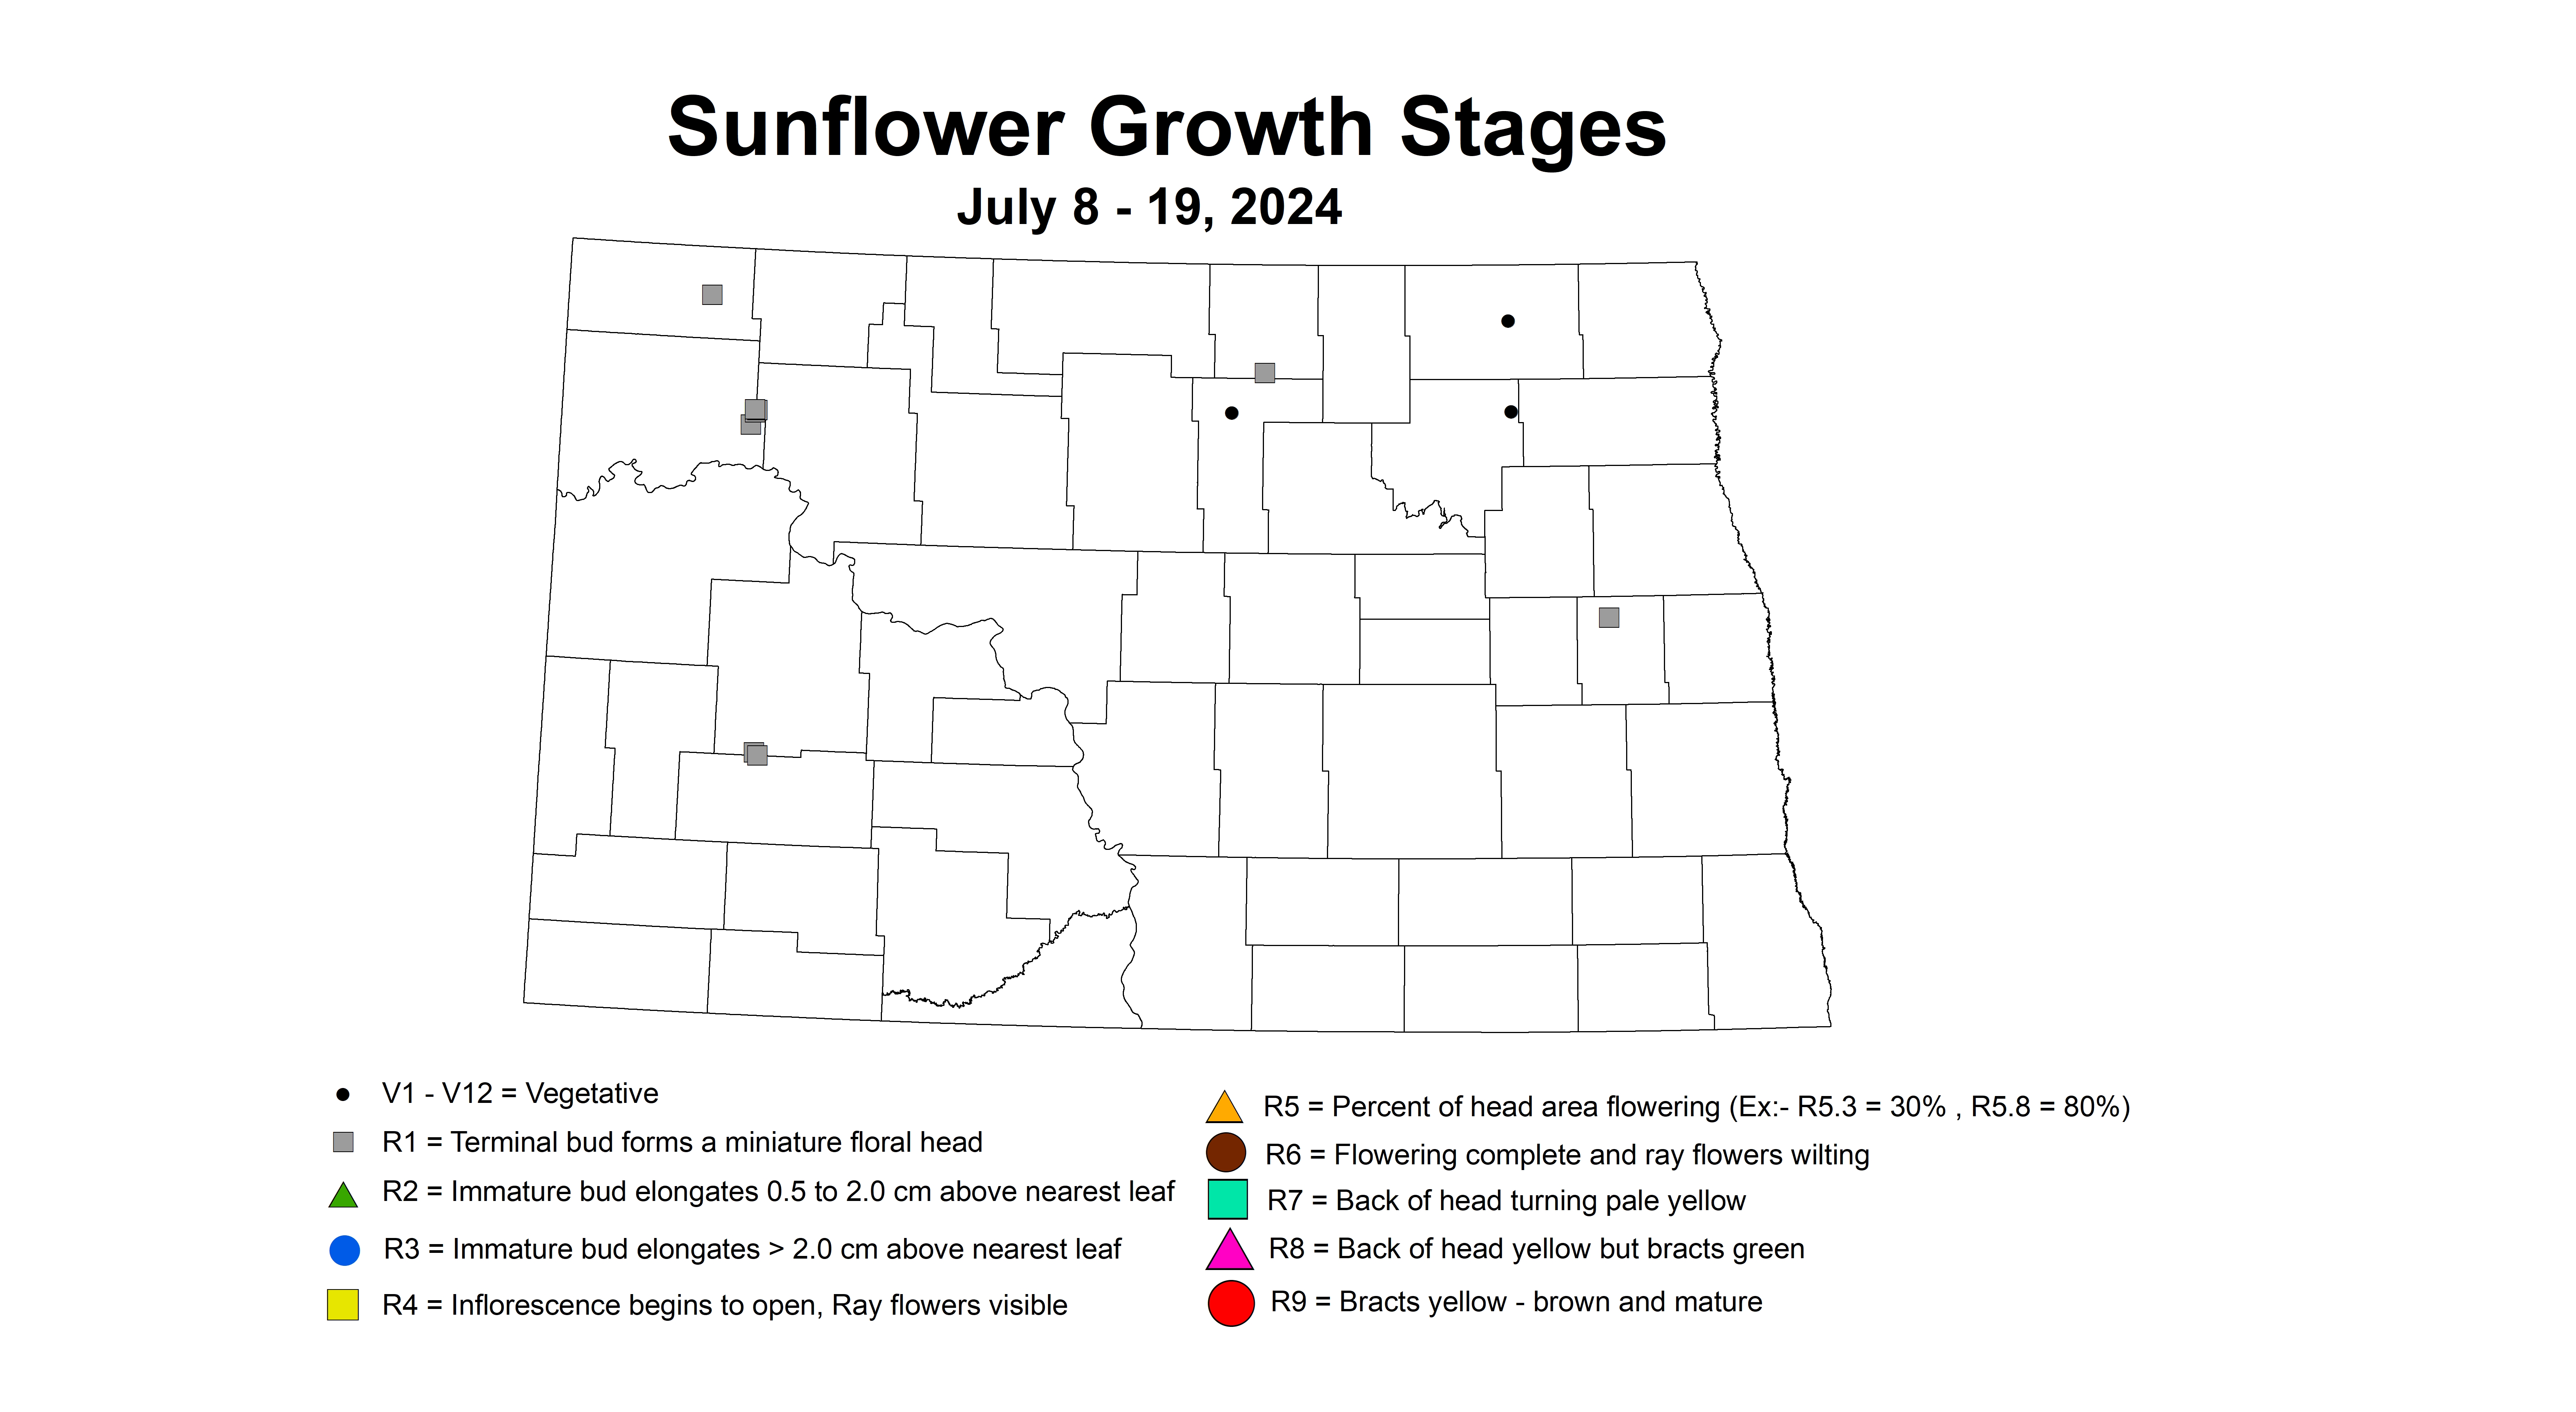 sunflower growth stages July 8 - 19 2024